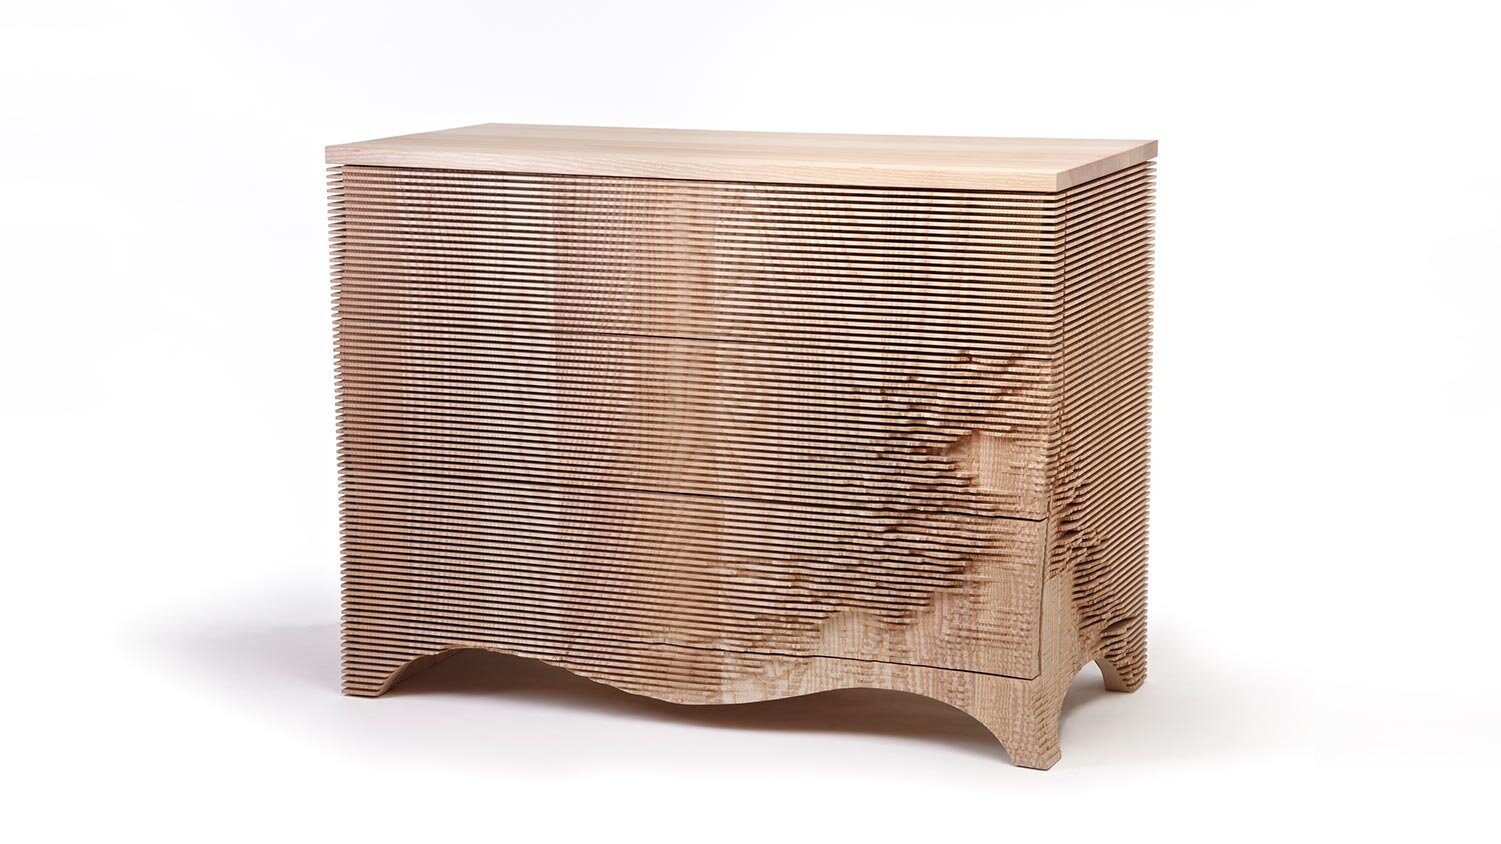 ash chest of drawers